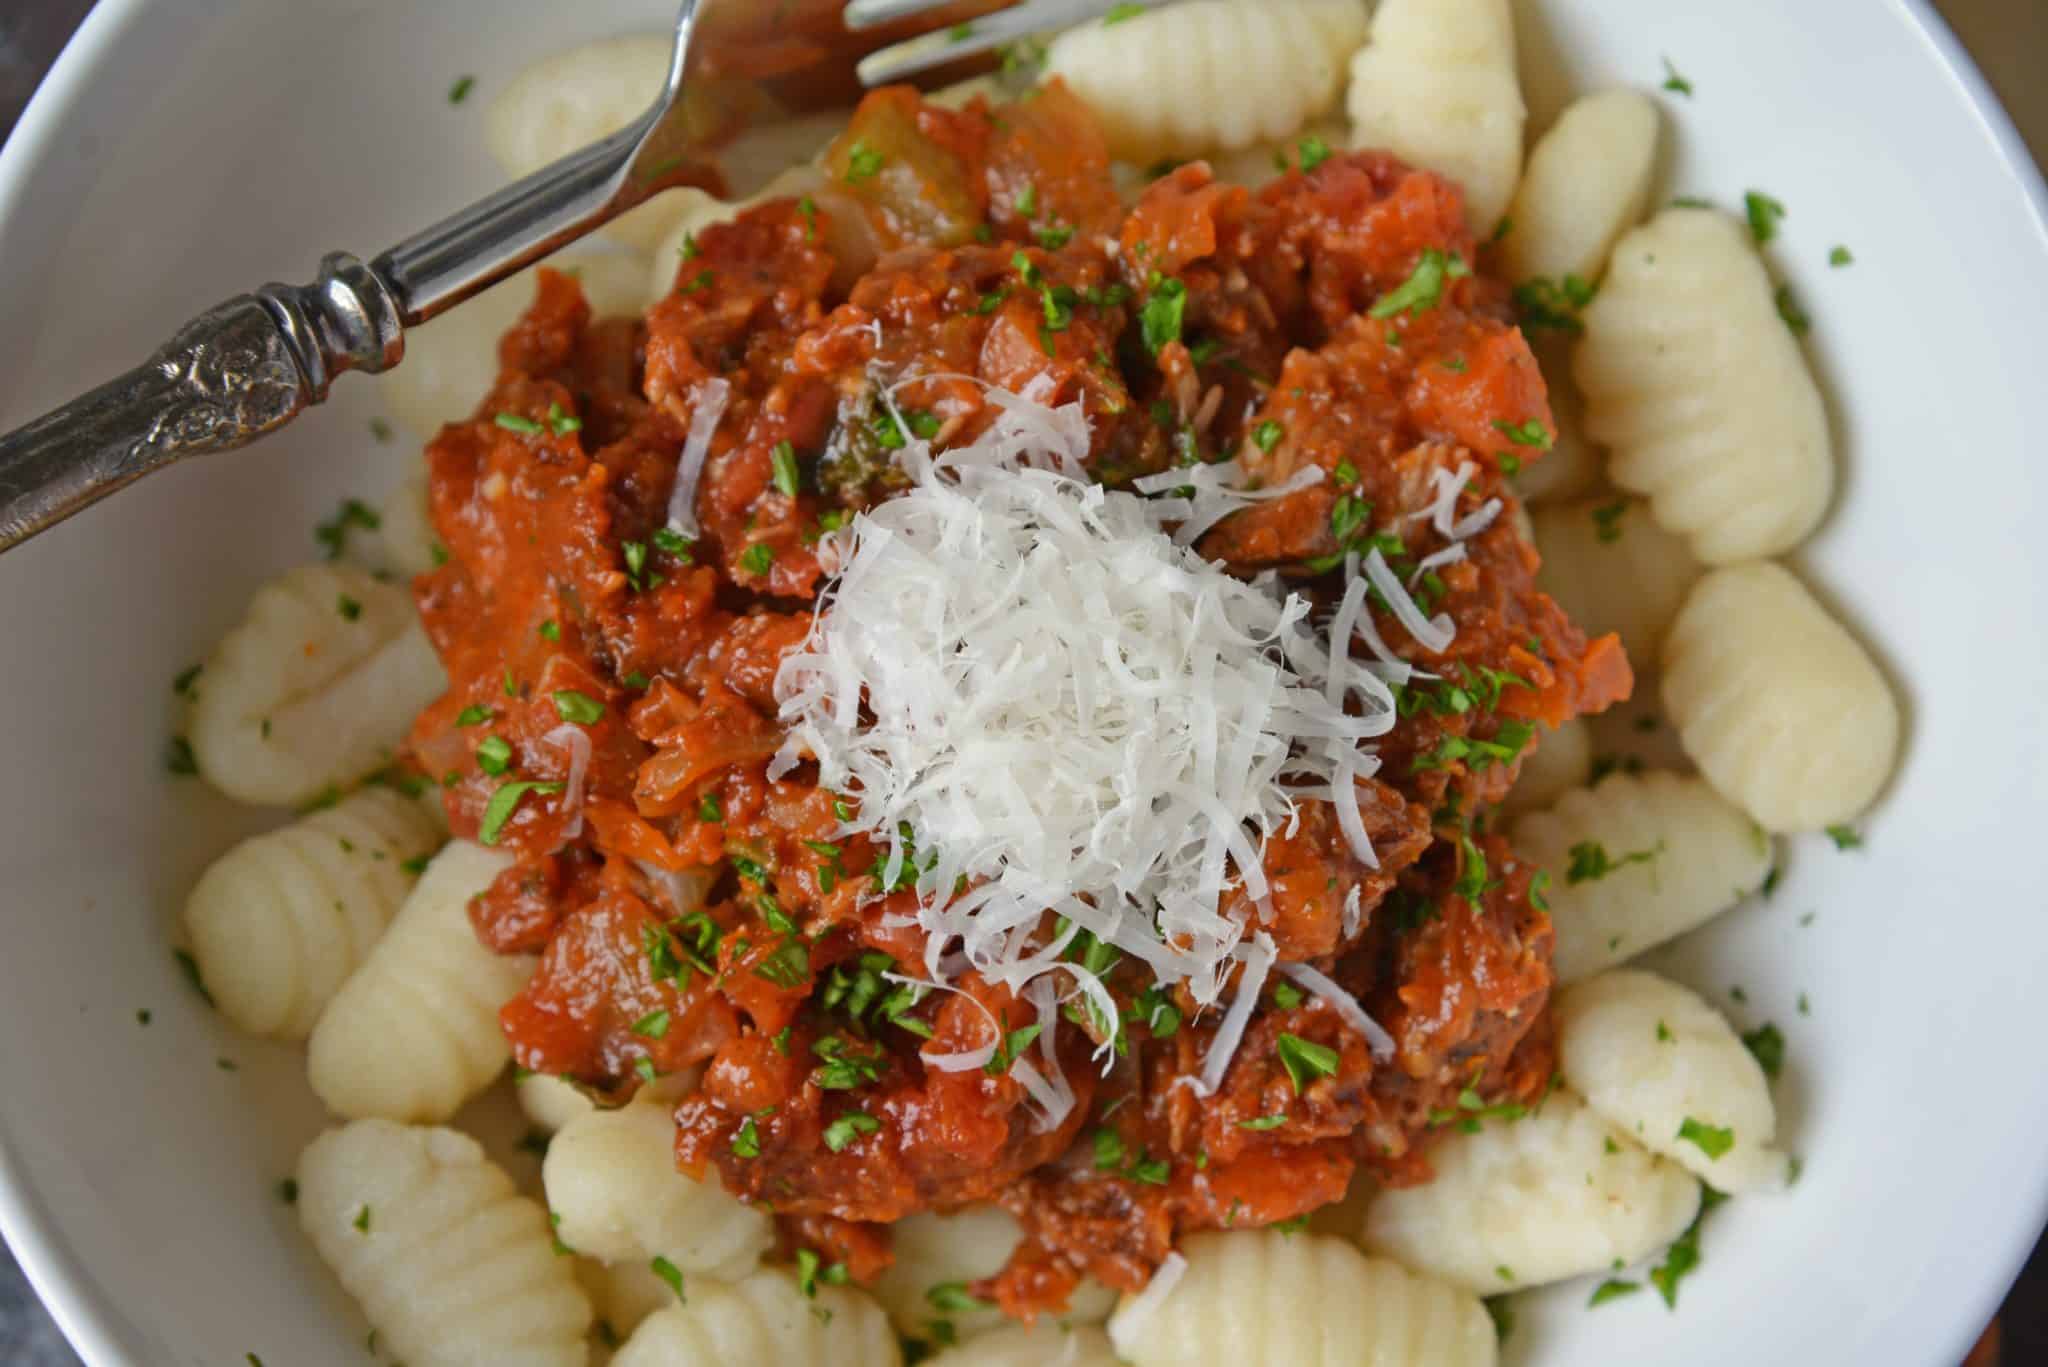 Slow Cooker Ragu uses a blend of 7 vegetables with shredded pork and flavorful spices to make a hearty and delicious ragu sauce. Serve over pasta. Also freezer friendly! #slowcookerragu #slowcookerrecipes www.savoryexperiments.com